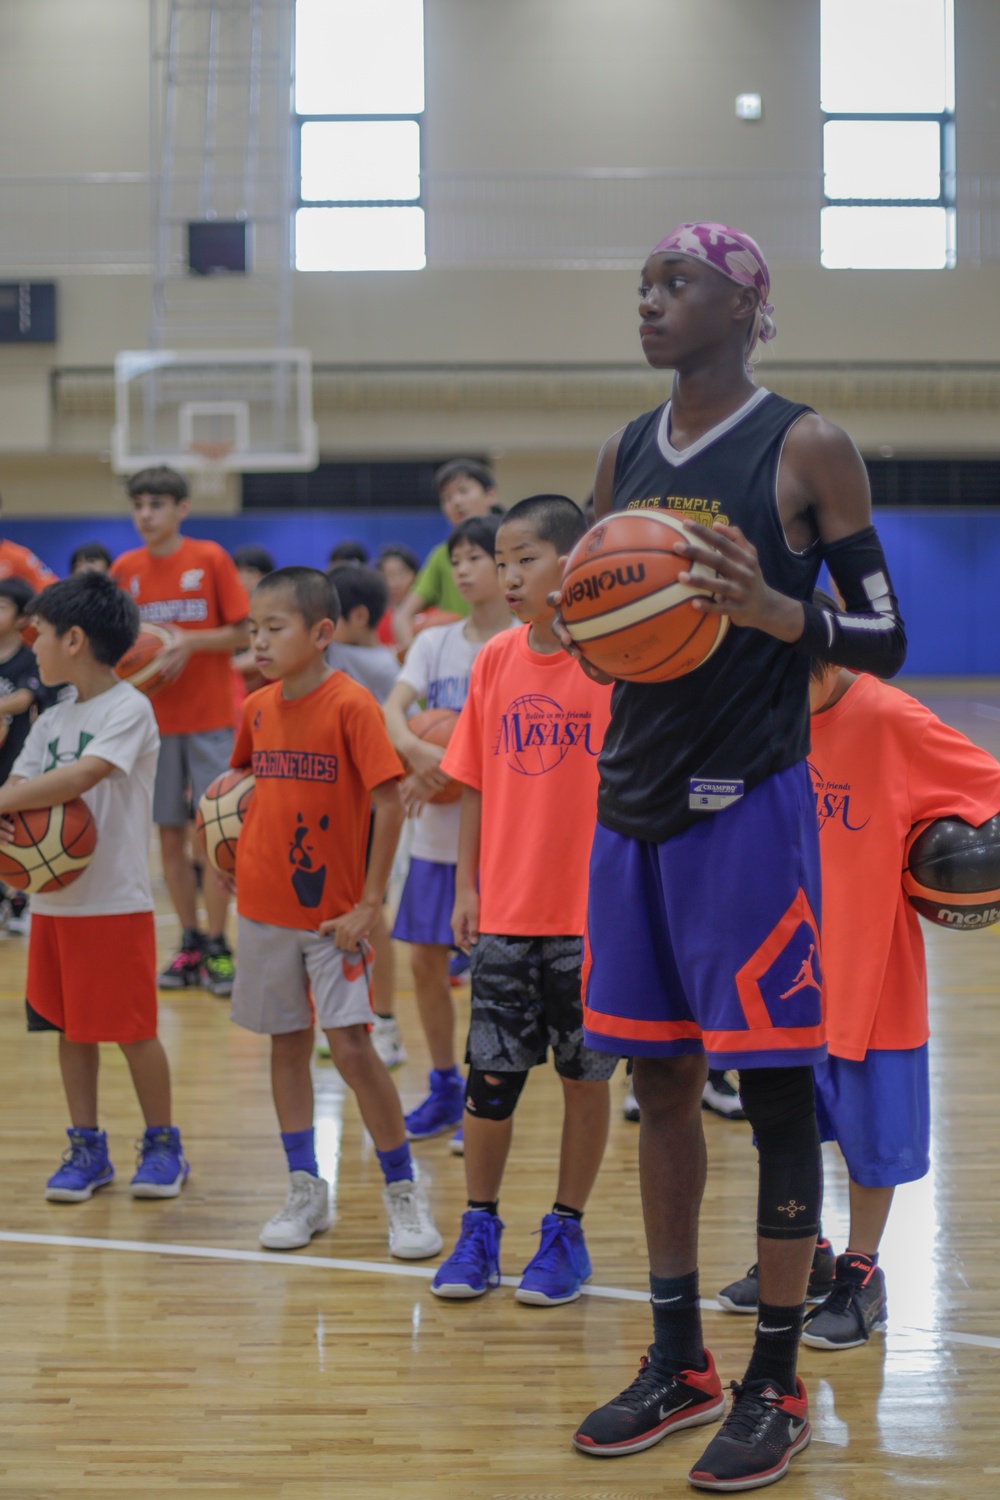 Japanese and American children score a cultural lay-up